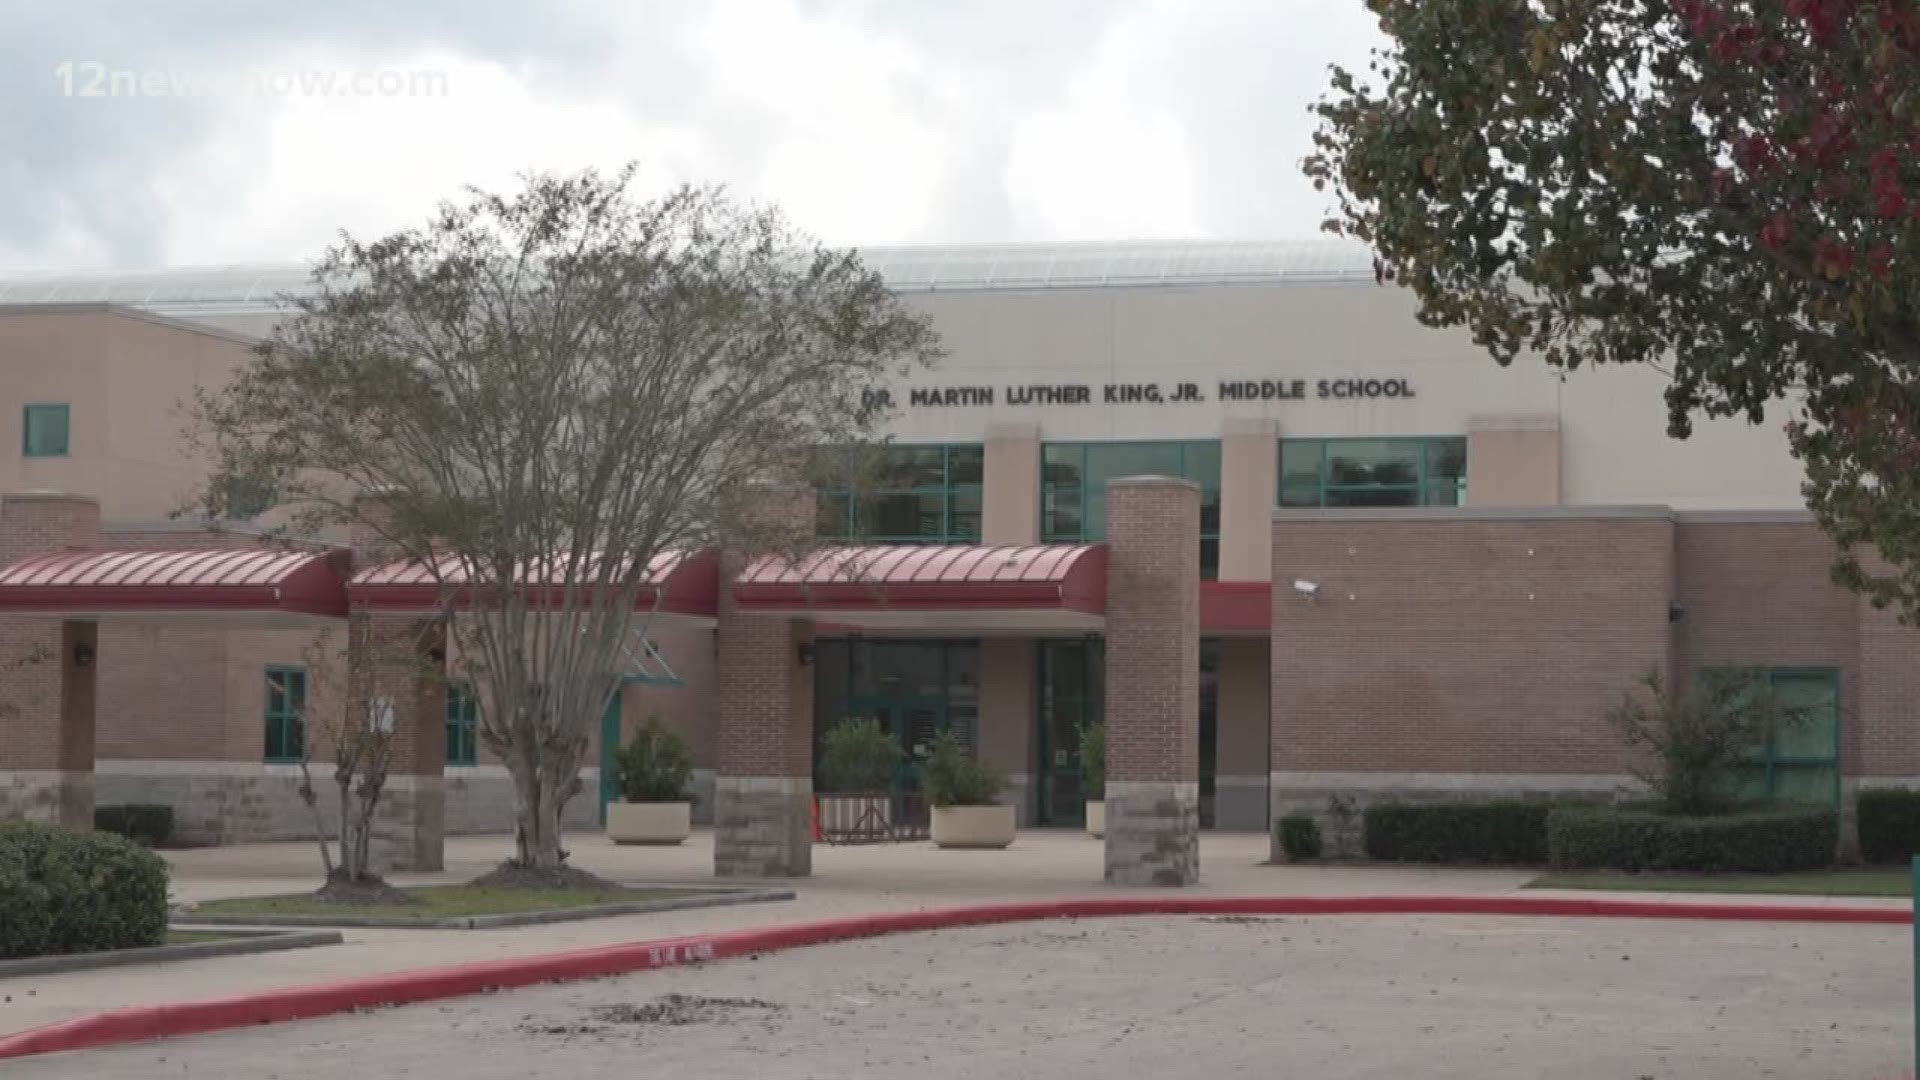 One person said there were 13 fights in a single day at Dr. Martin Luther King Jr. Middle School.